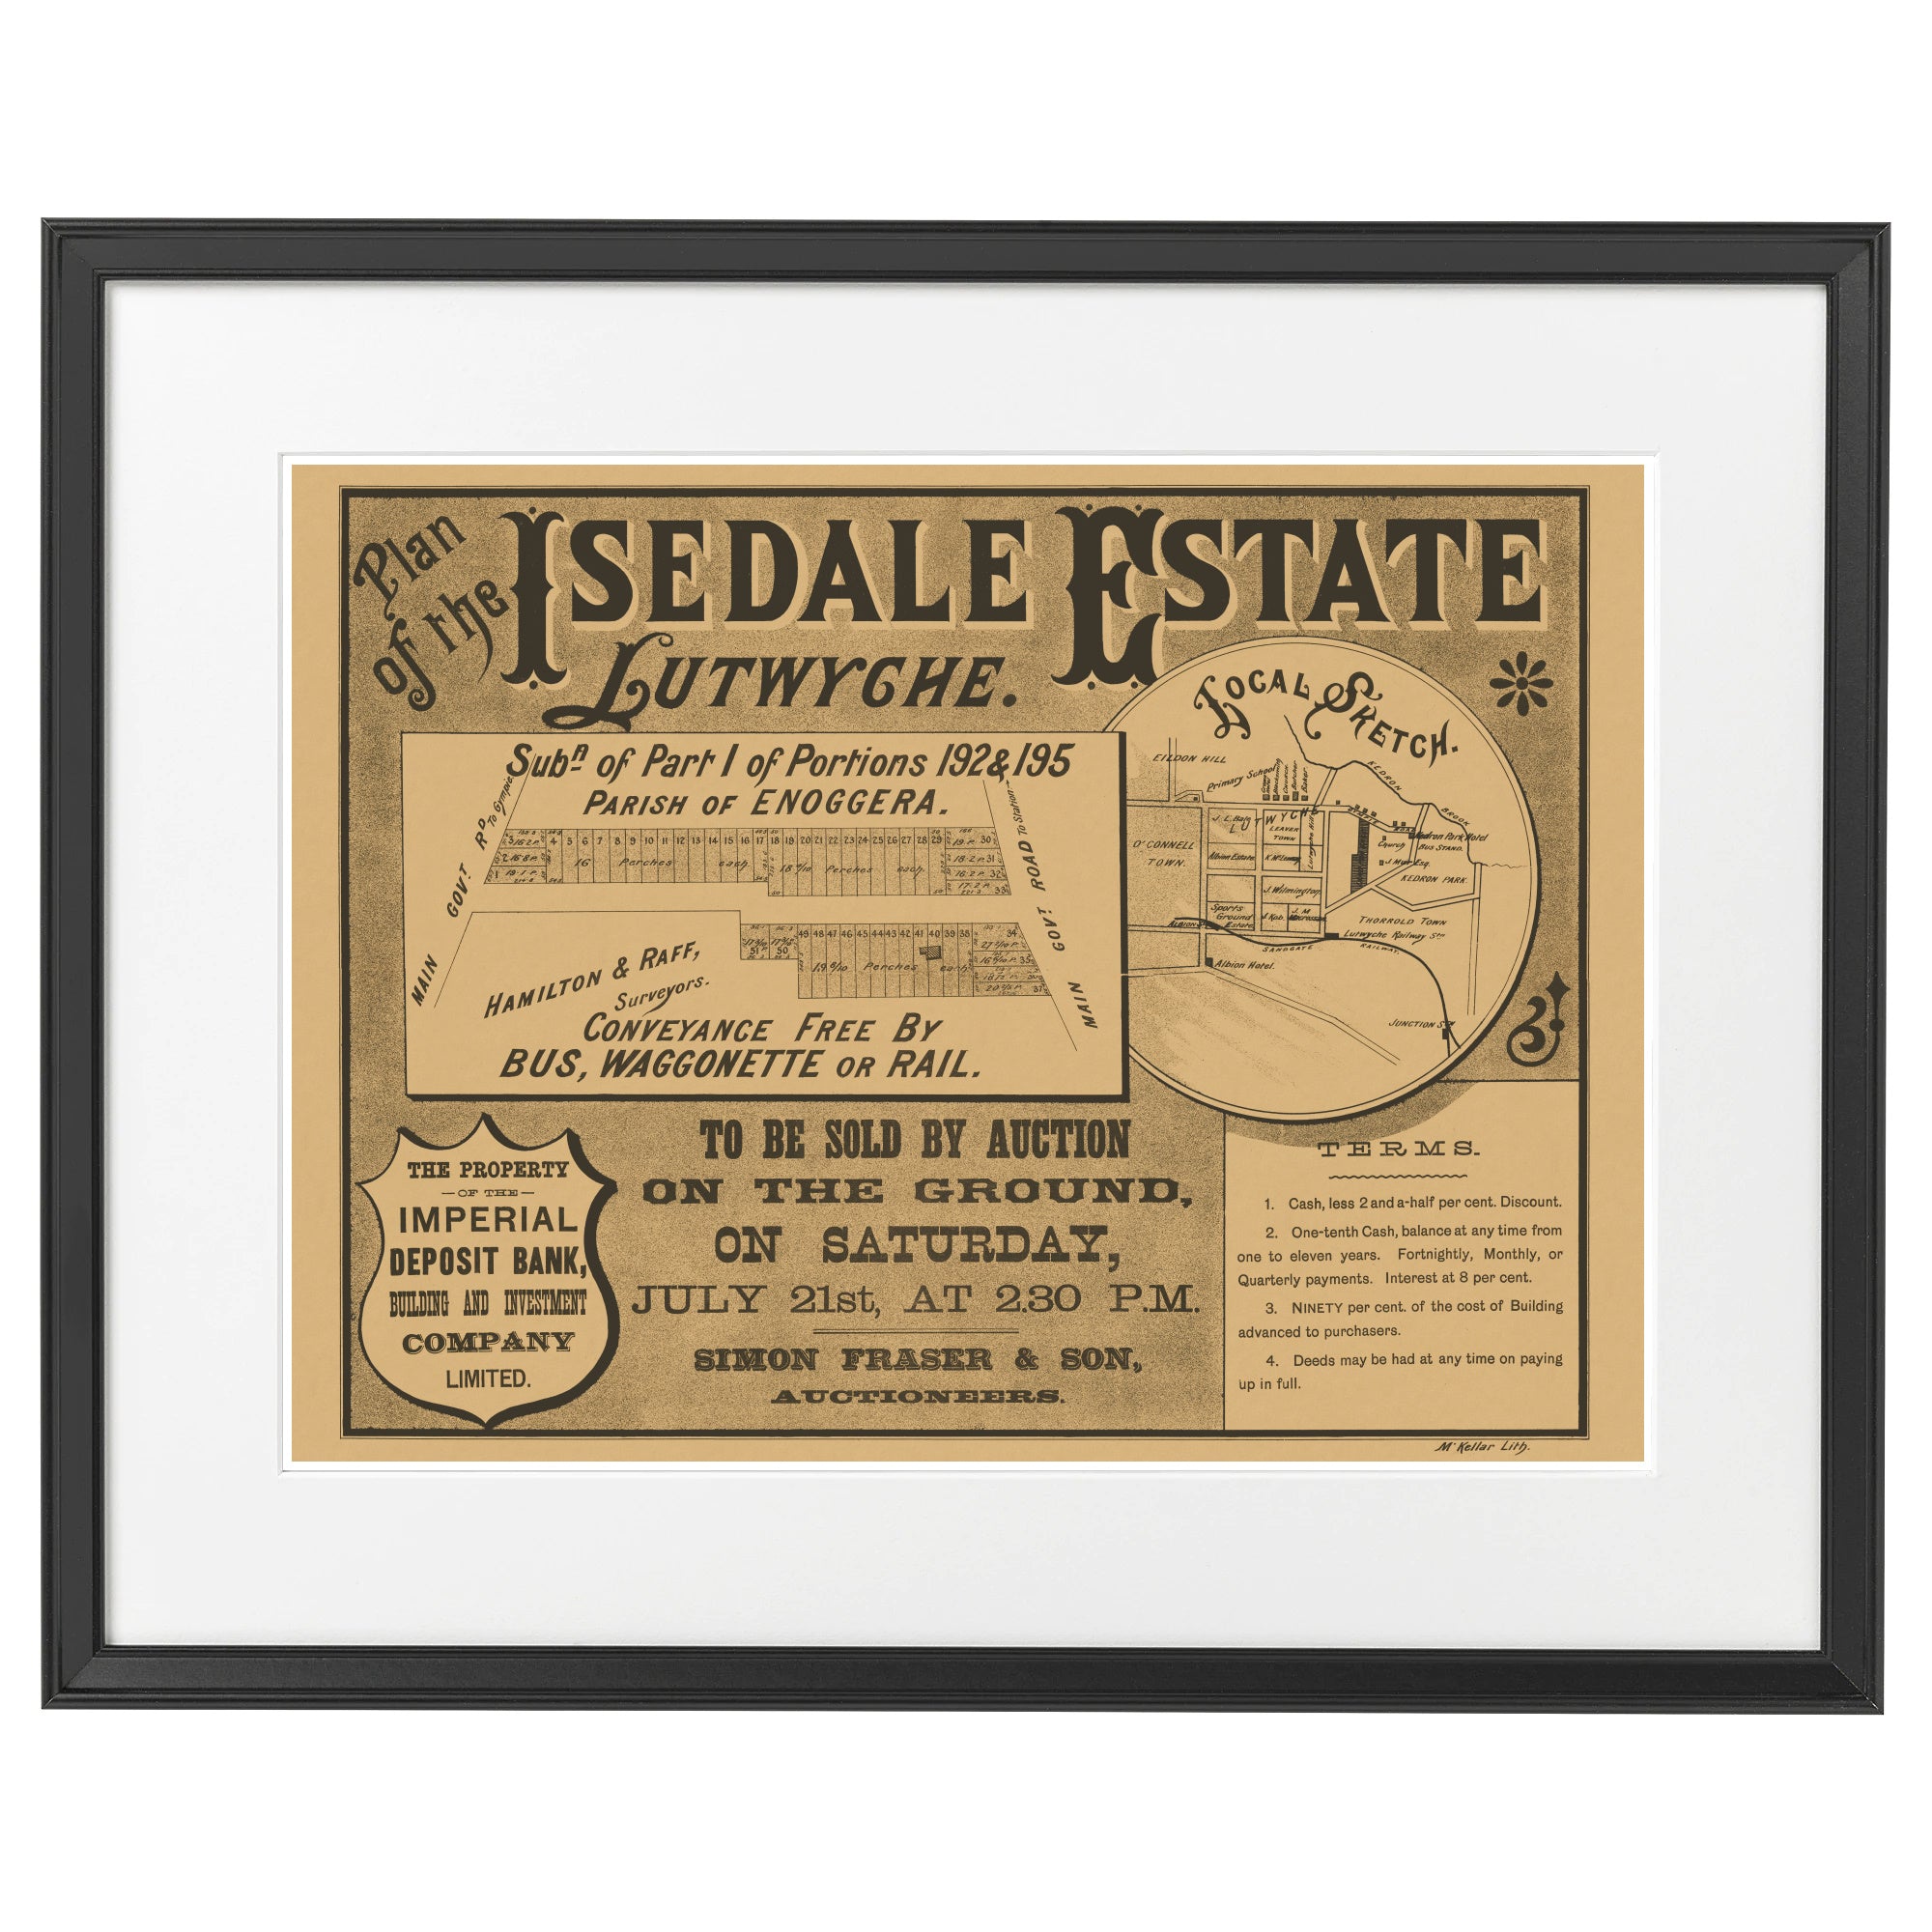 1888 Isedale Estate - 133 years ago today